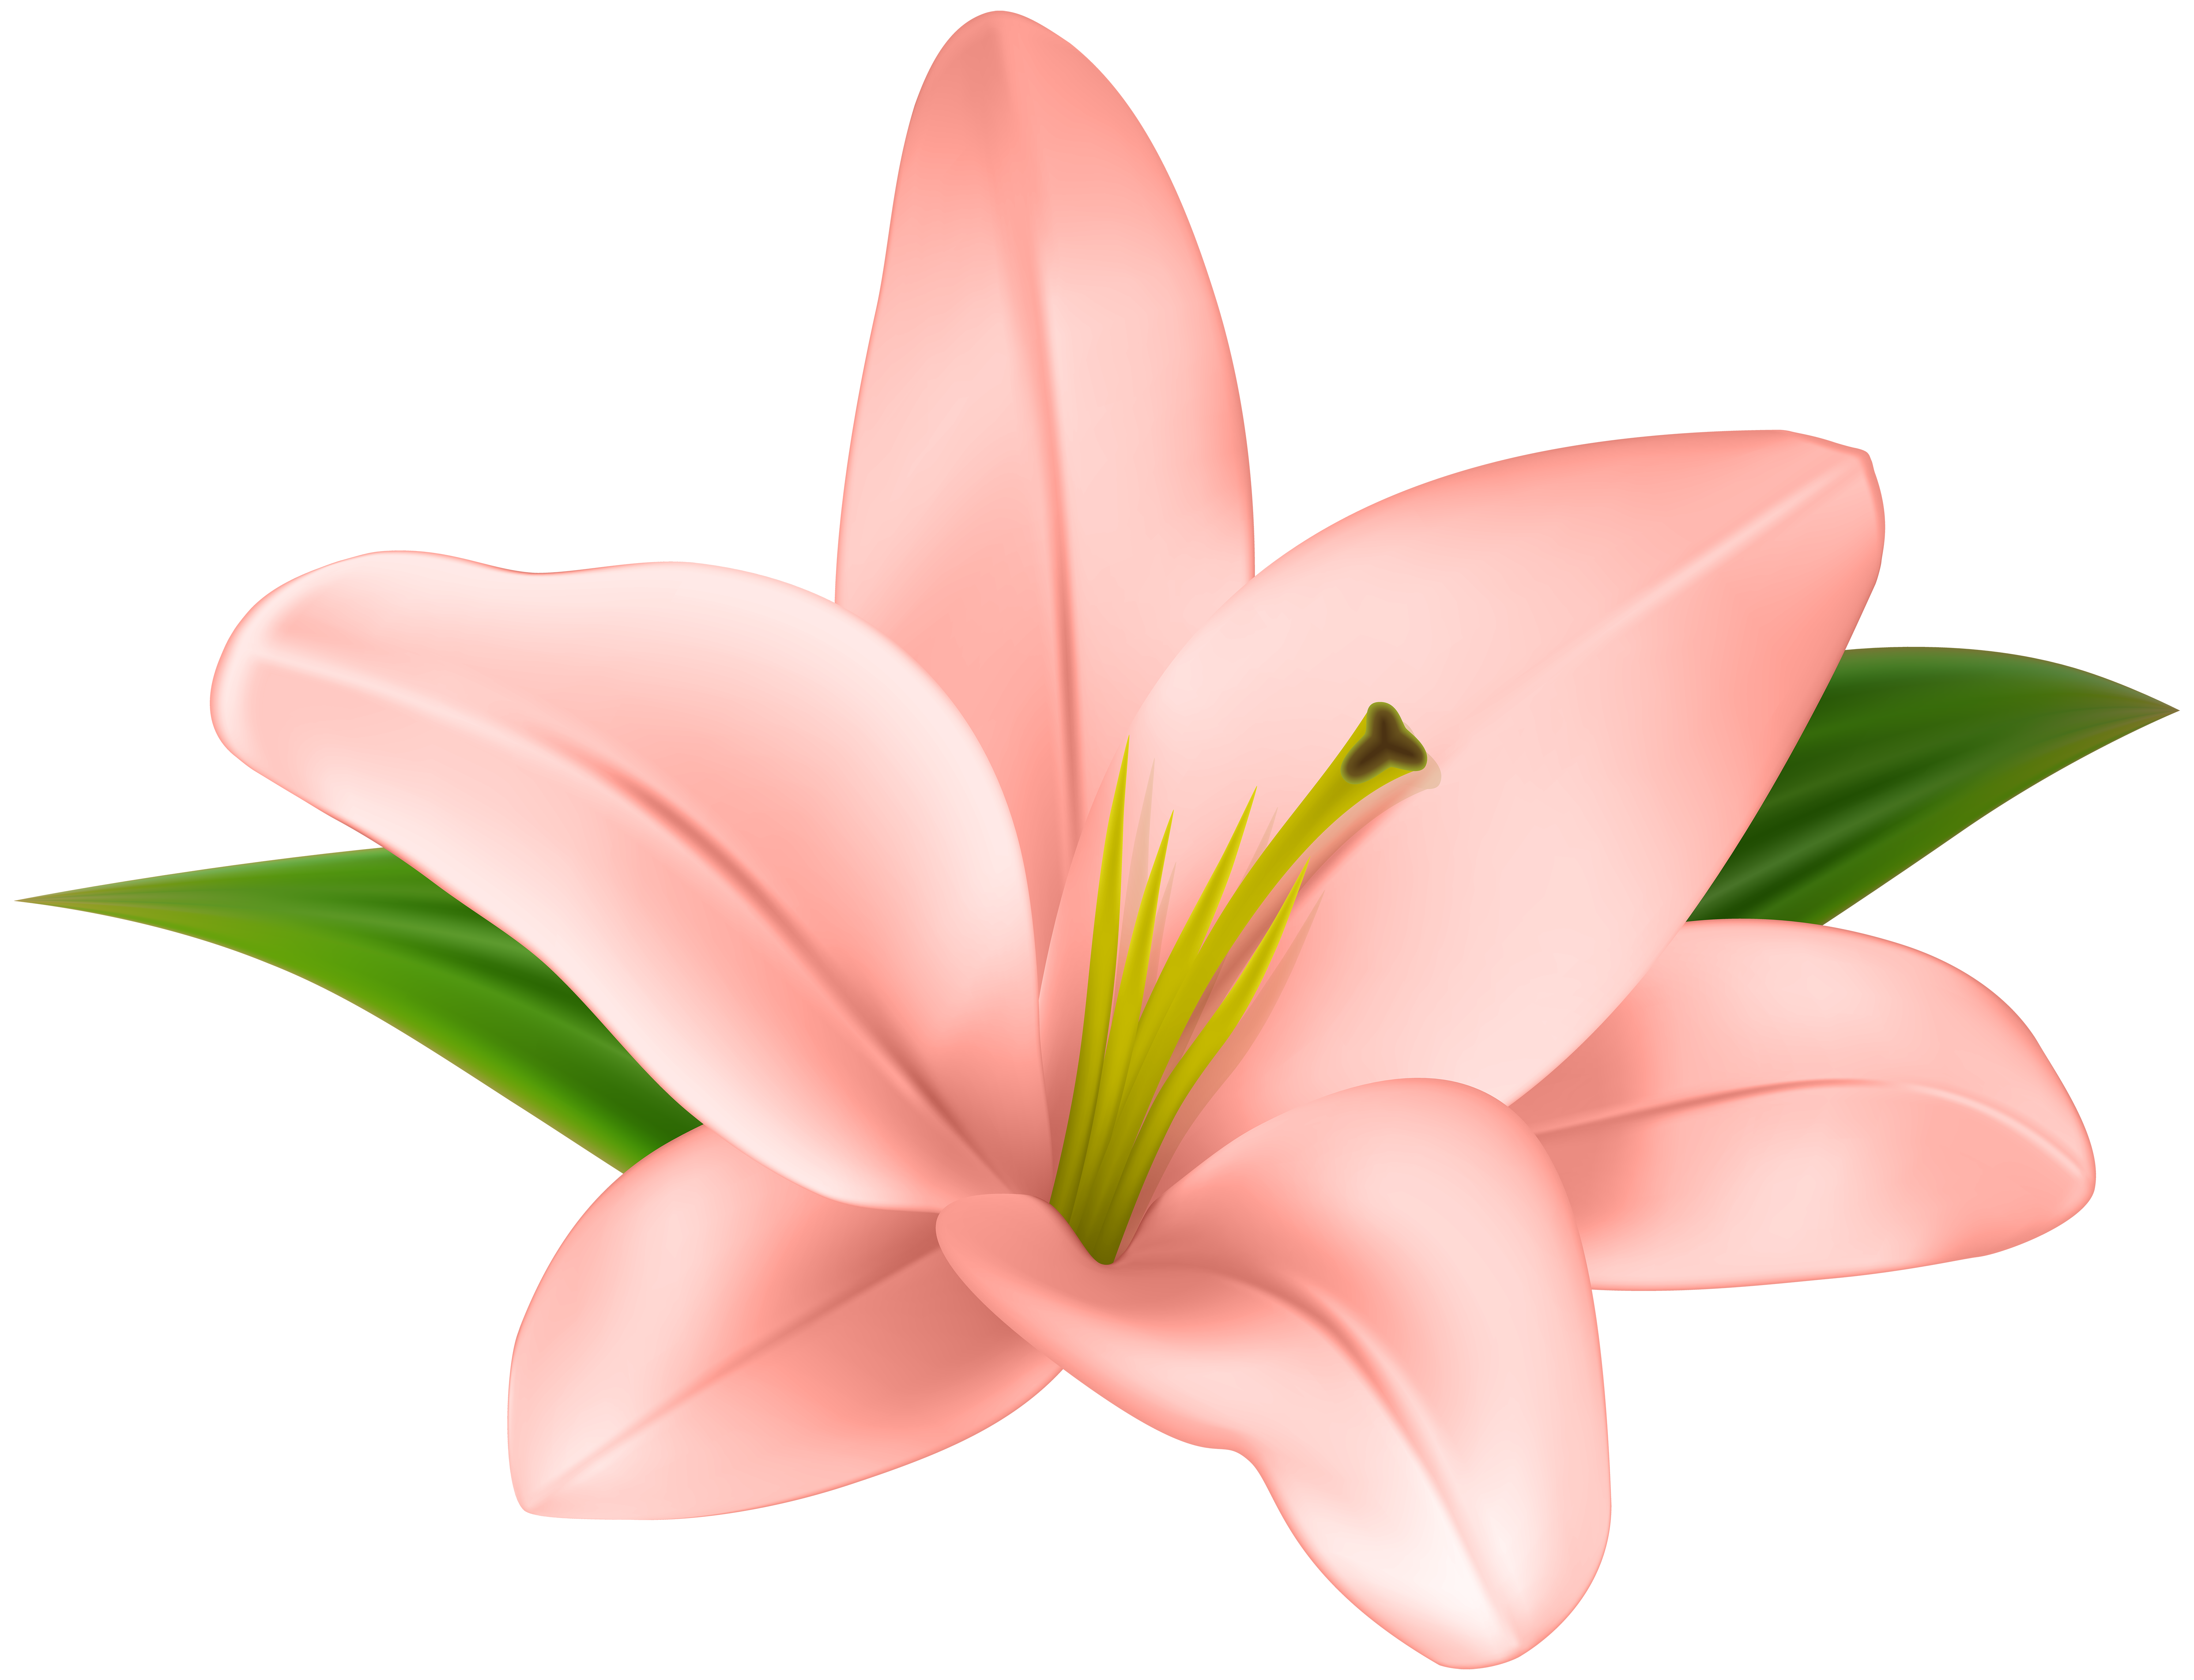 Lily flowers picture clipart images gallery for free